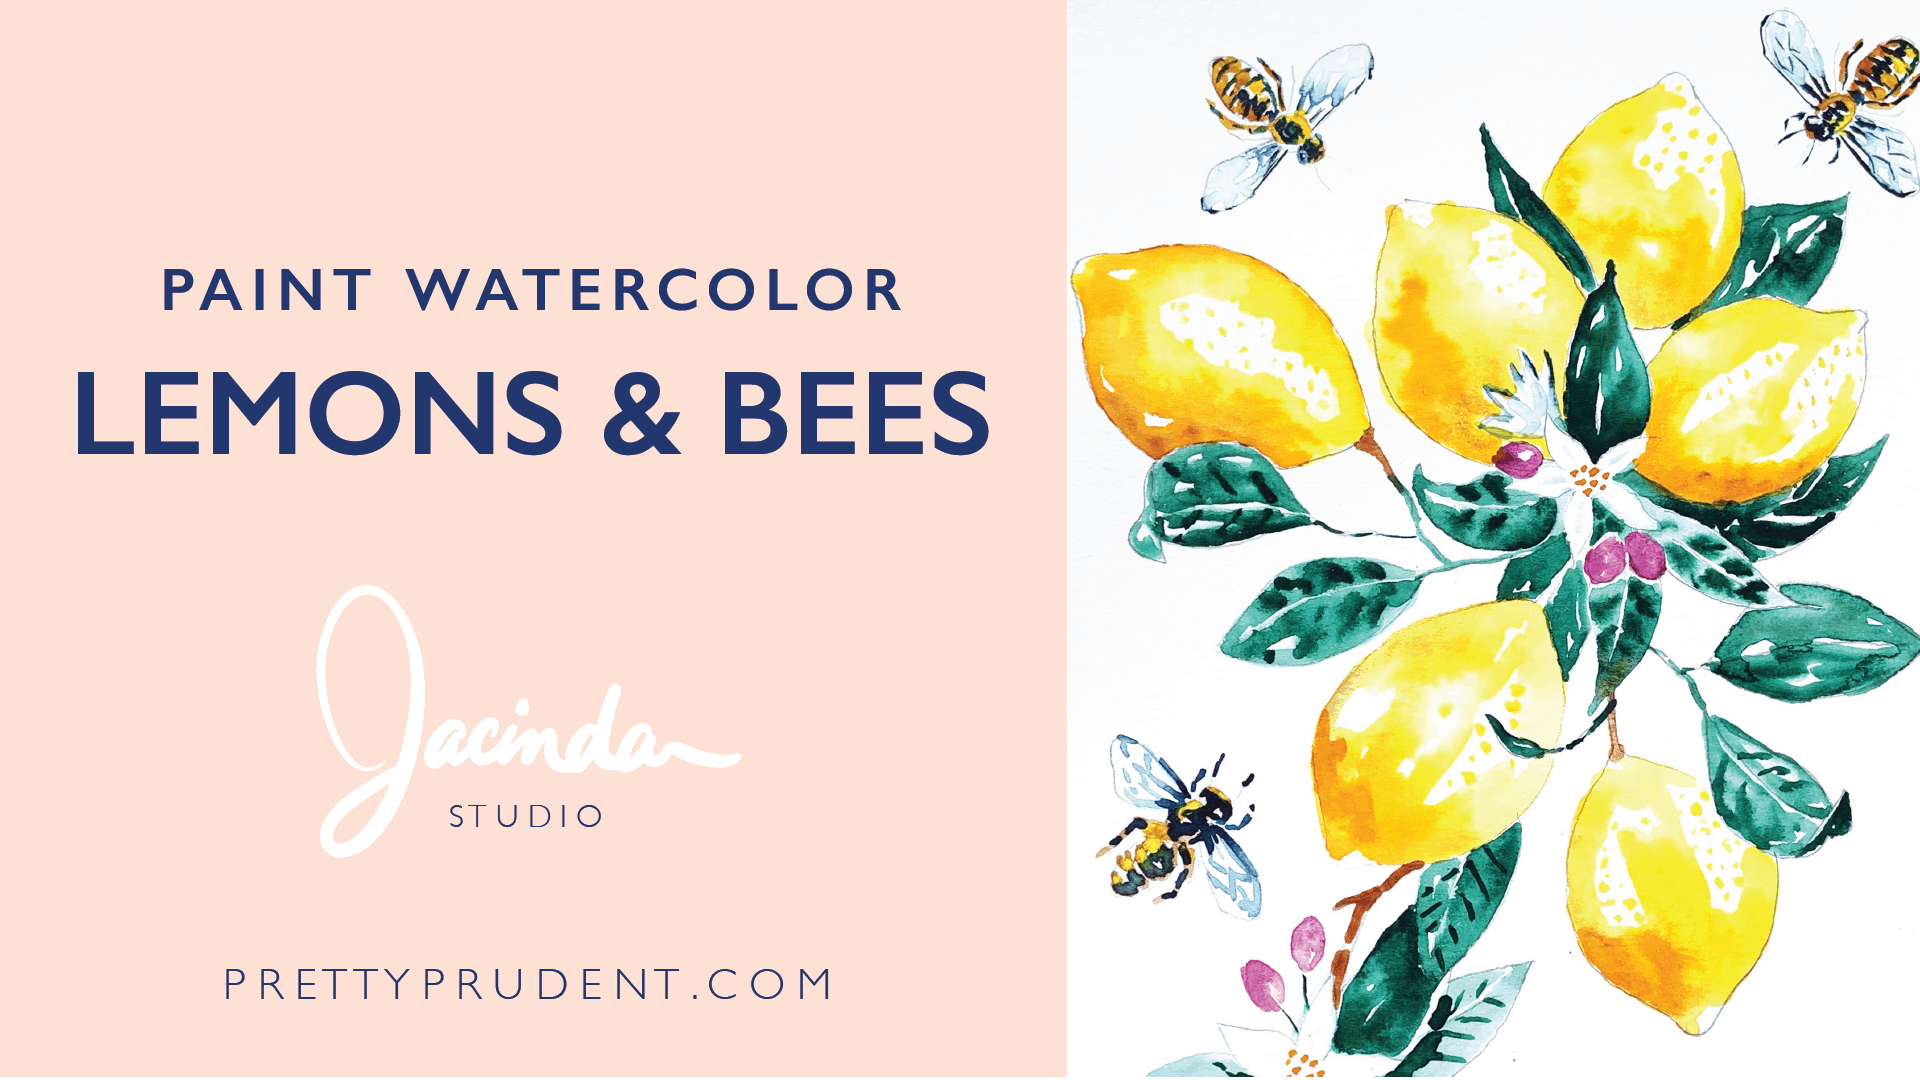 Watercolor Paint Lemons and Bees